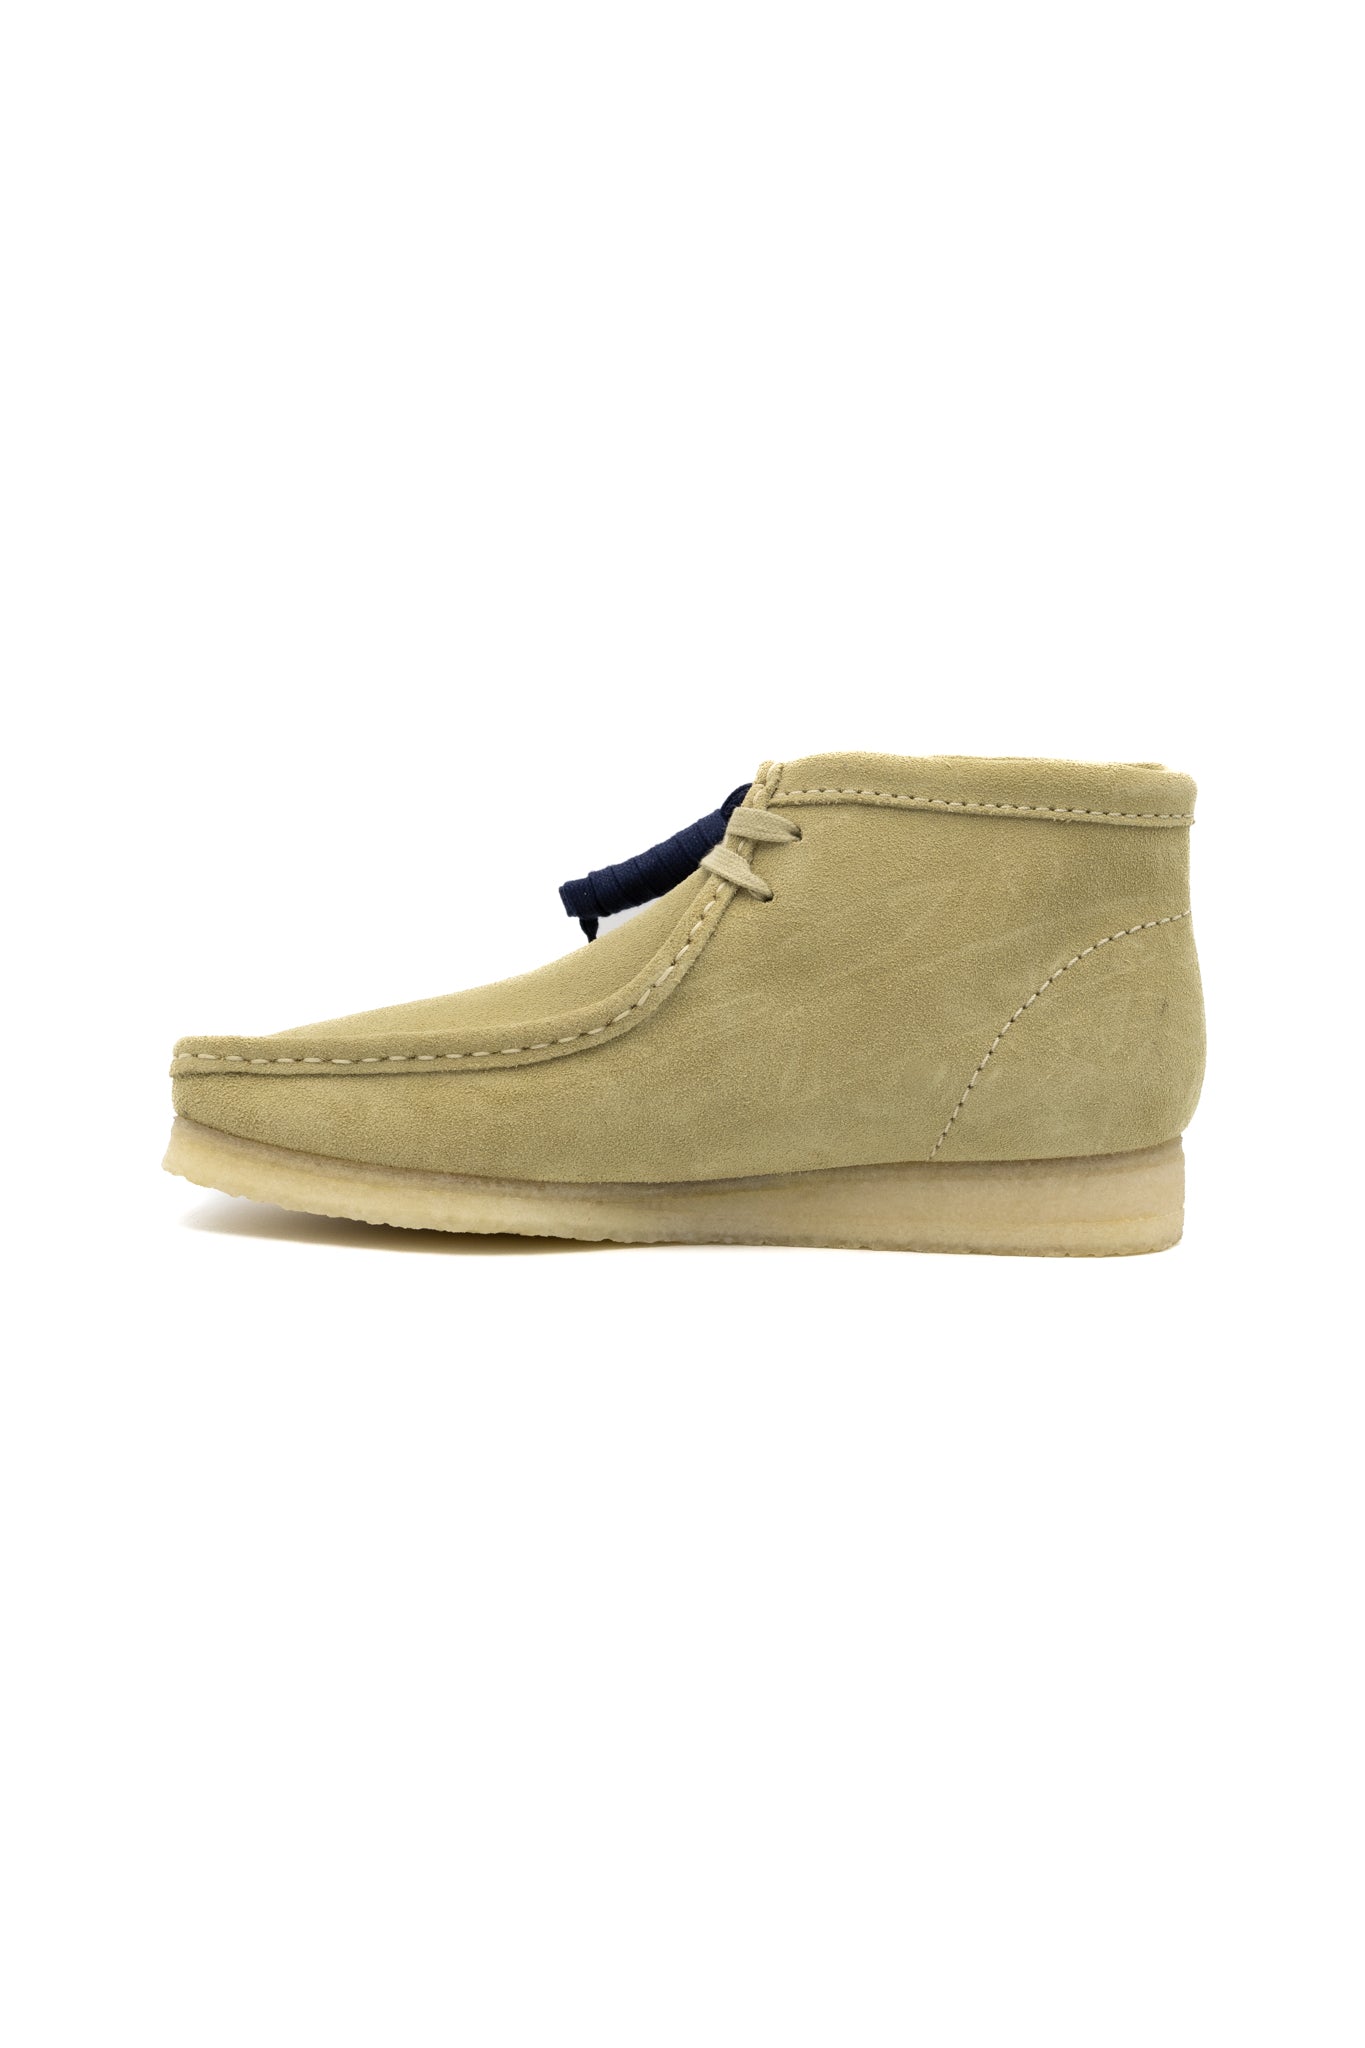 Clarks Originals Wallaby Boot in Maple Suede. Crafted with butter-soft suede for a premium feel, this iconic silhouette stays true to its design DNA with a chunky pebble crepe sole, waxy laces and tonal logo fobs. Premium maple suede upper Breathable leather lining Part-recycled natural rubber pebble crepe sole Includes additional lace for versatile wear Finished with two fobs (Clarks Originals and Wallabee) 